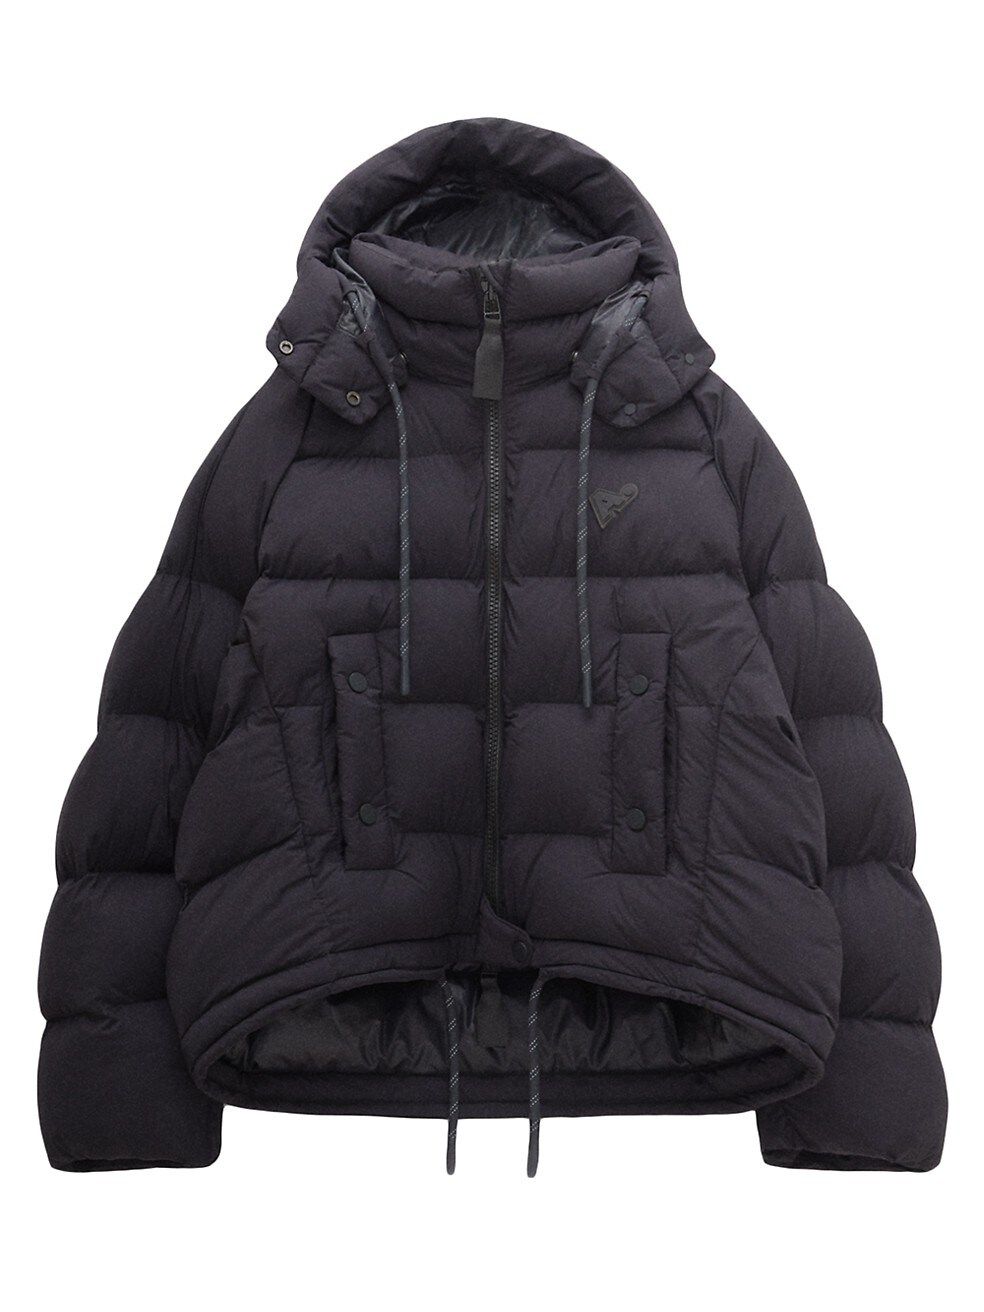 The Arrivals Turbo Puffer Down Jacket | Saks Fifth Avenue